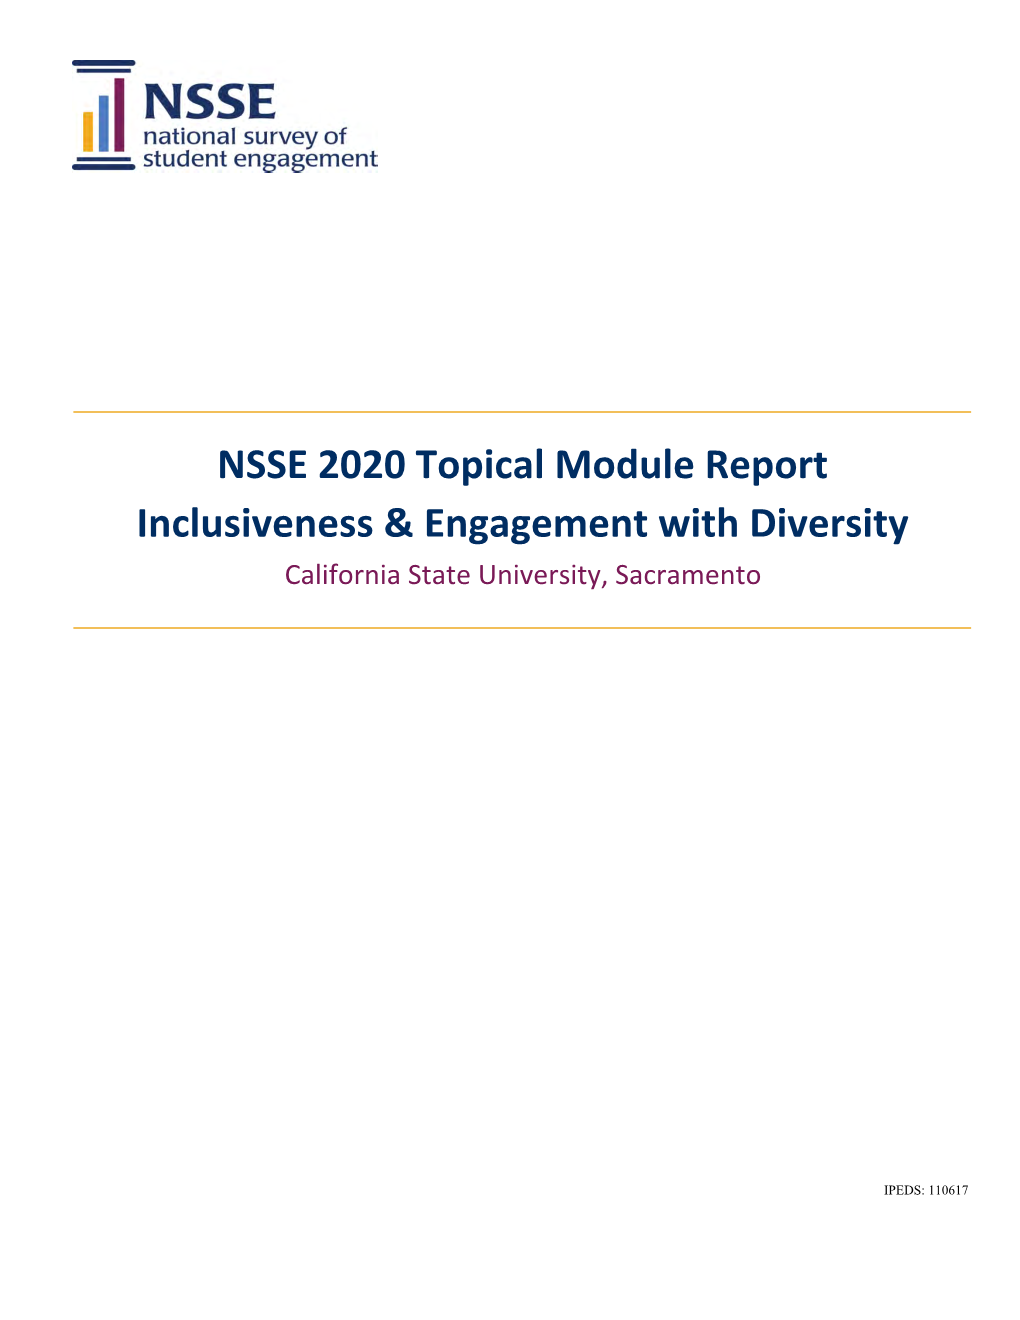 NSSE 2020 Topical Module Report Inclusiveness & Engagement with Diversity California State University, Sacramento